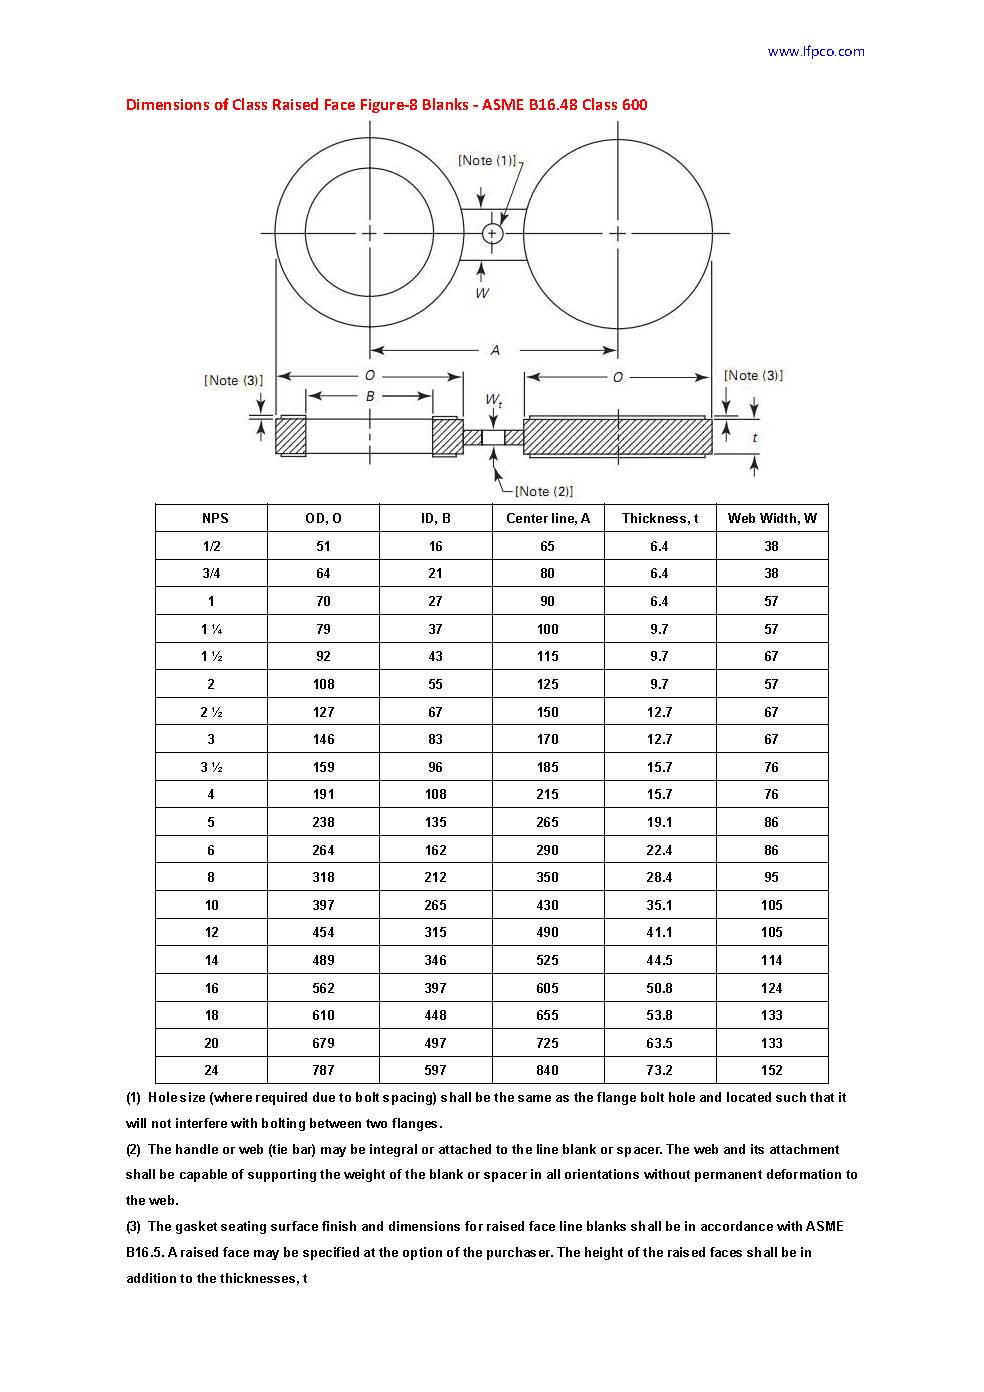 Dimensions of raised face figure 8 blanks ASME B16.48_class600